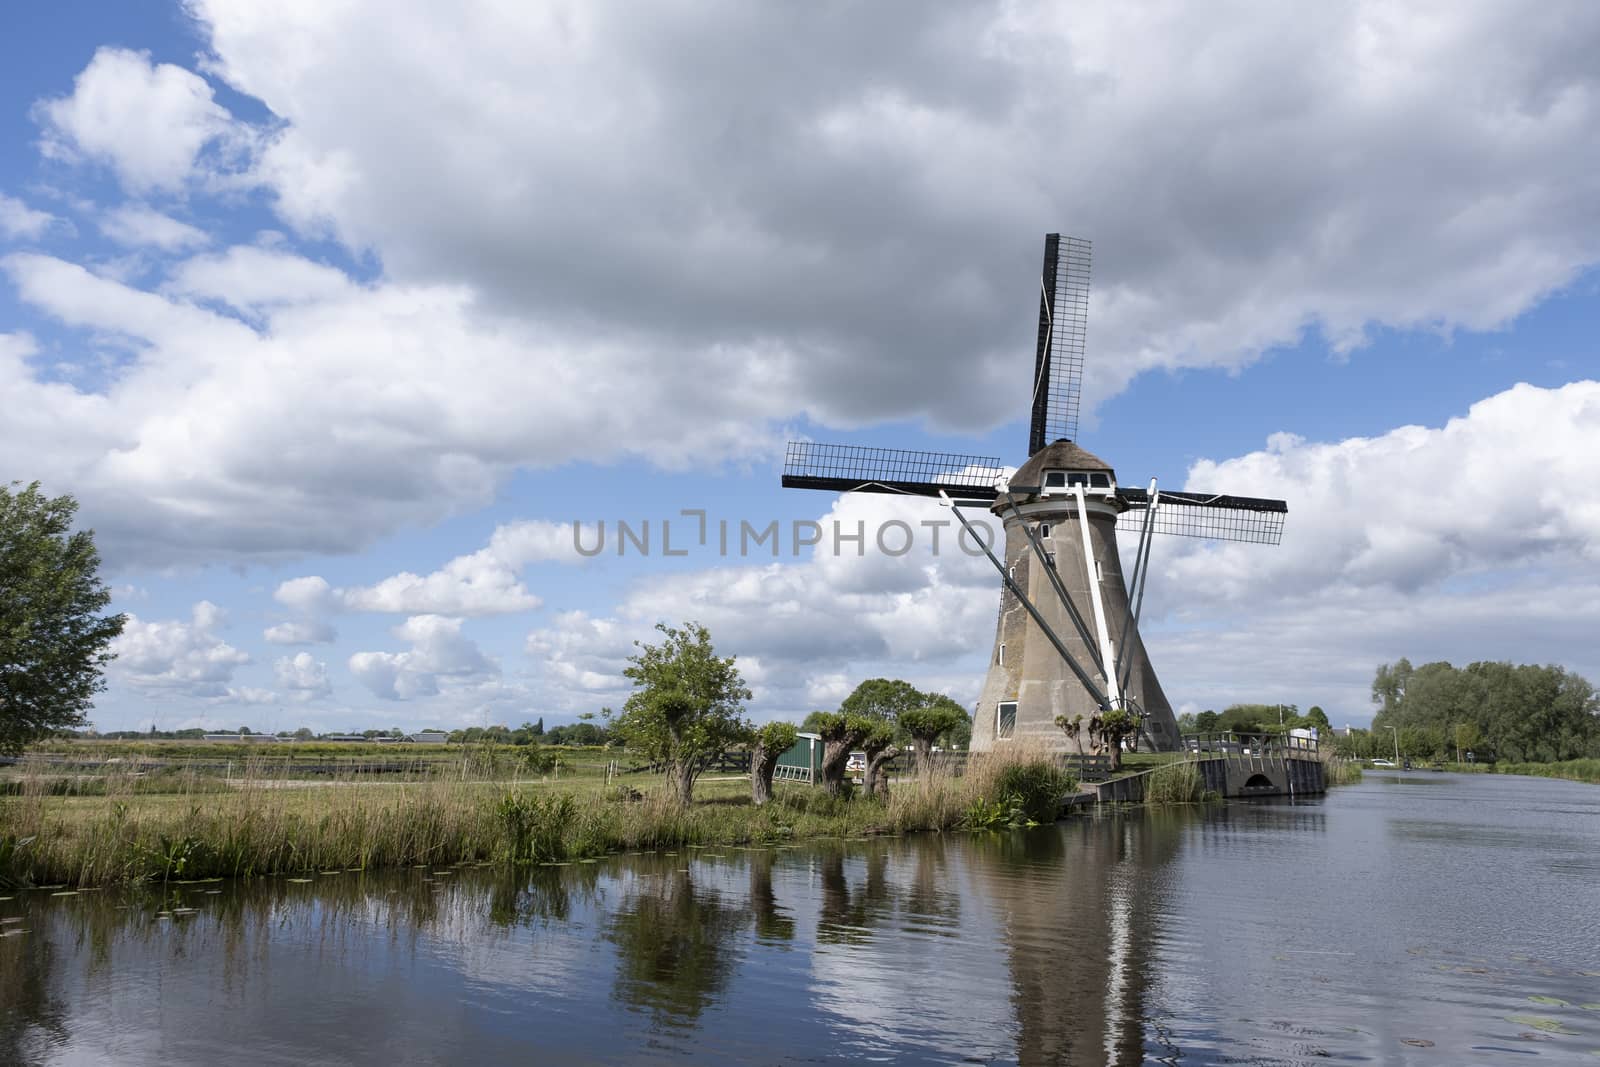 Traditional setting of the historical dutch windmills landscape, Holland by Tjeerdkruse